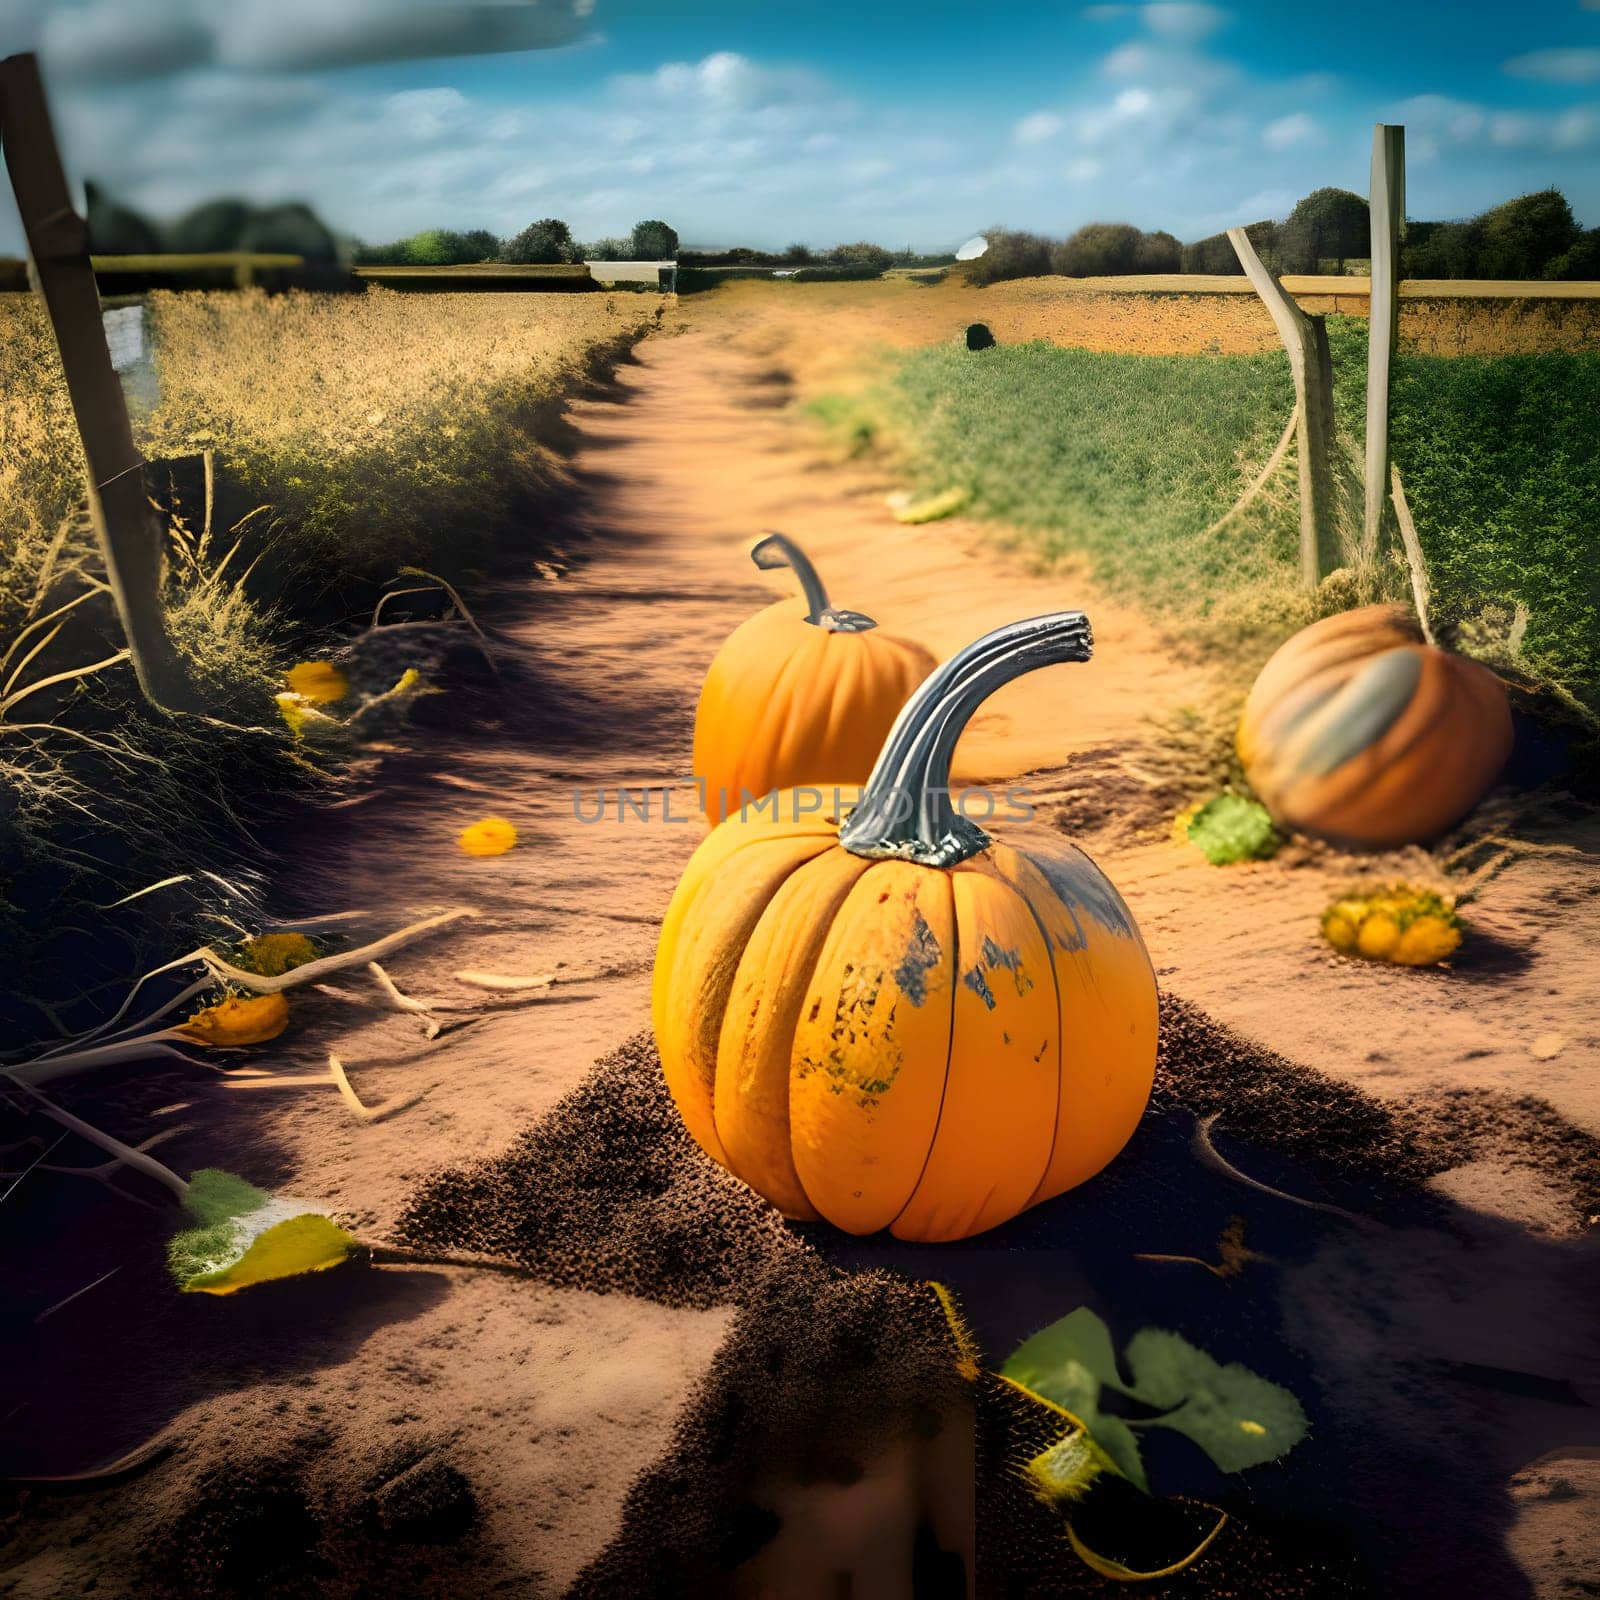 Pumpkins on the path. Pumpkin as a dish of thanksgiving for the harvest. by ThemesS